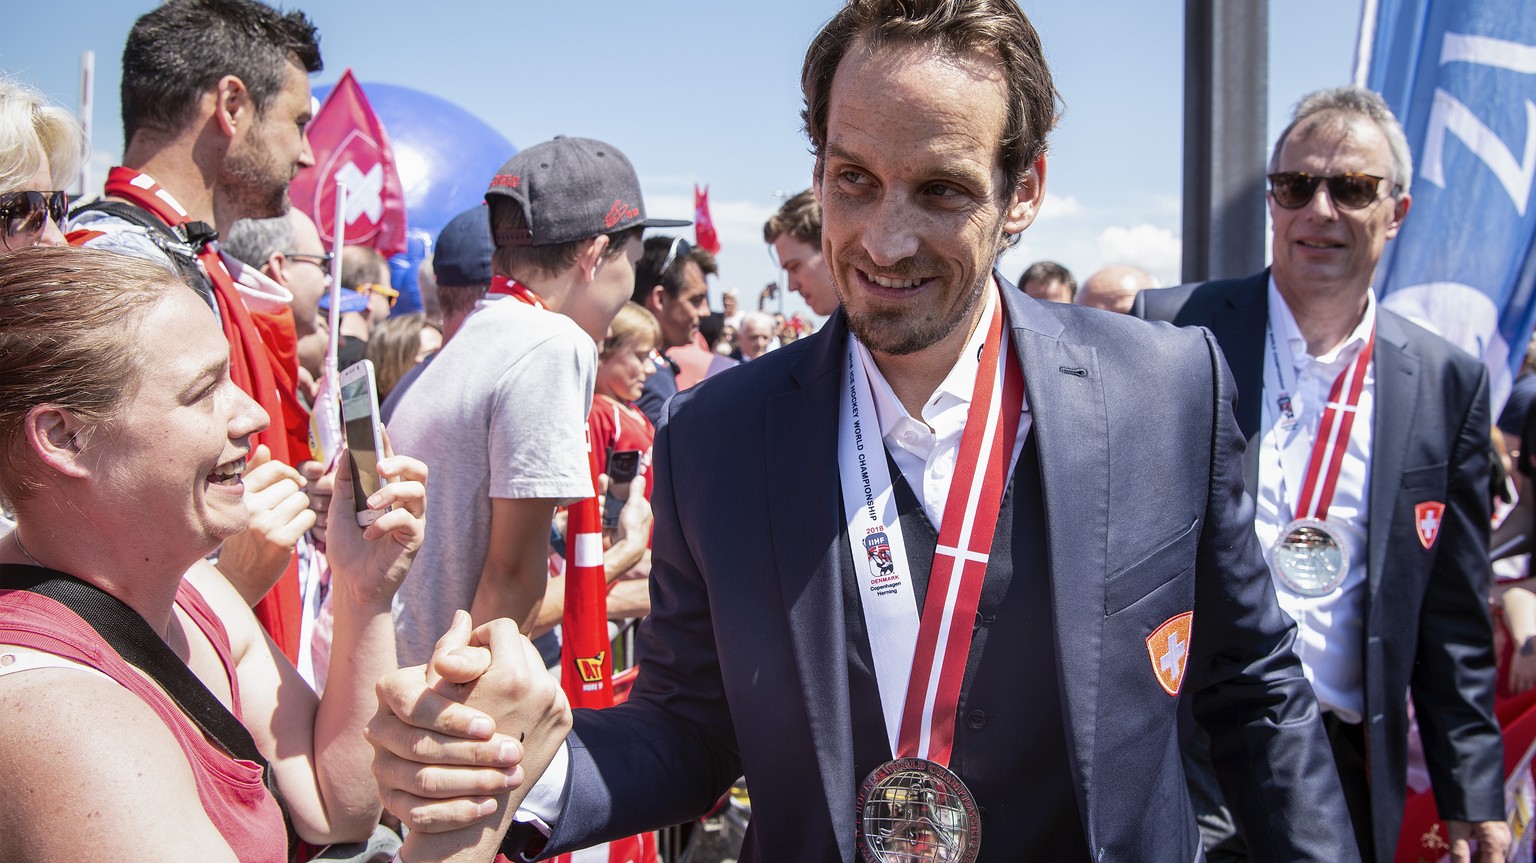 Switzerland’s ice hockey team with coach Patrick Fischer arrives and is welcomed by fans at Zurich airport in Kloten, Switzerland, Monday, May 21, 2018. Switzerland won the silver medal at the IIHF Wo ...